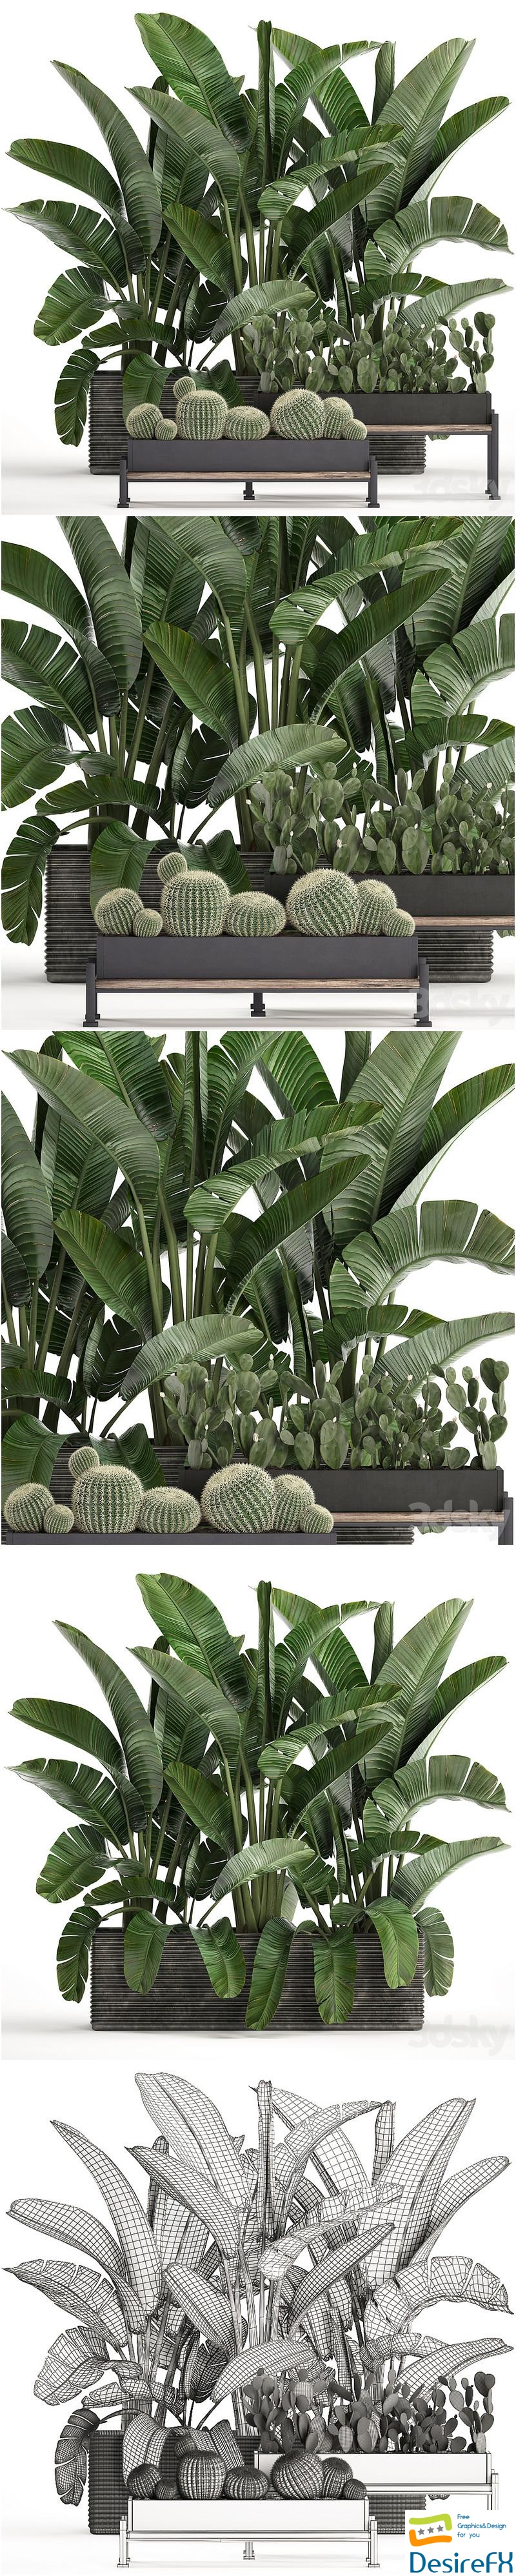 A collection of lush plants thickets in black pots with cacti, palm, strelitzia, bushes, prickly pear, banana. Set 458 3D Model